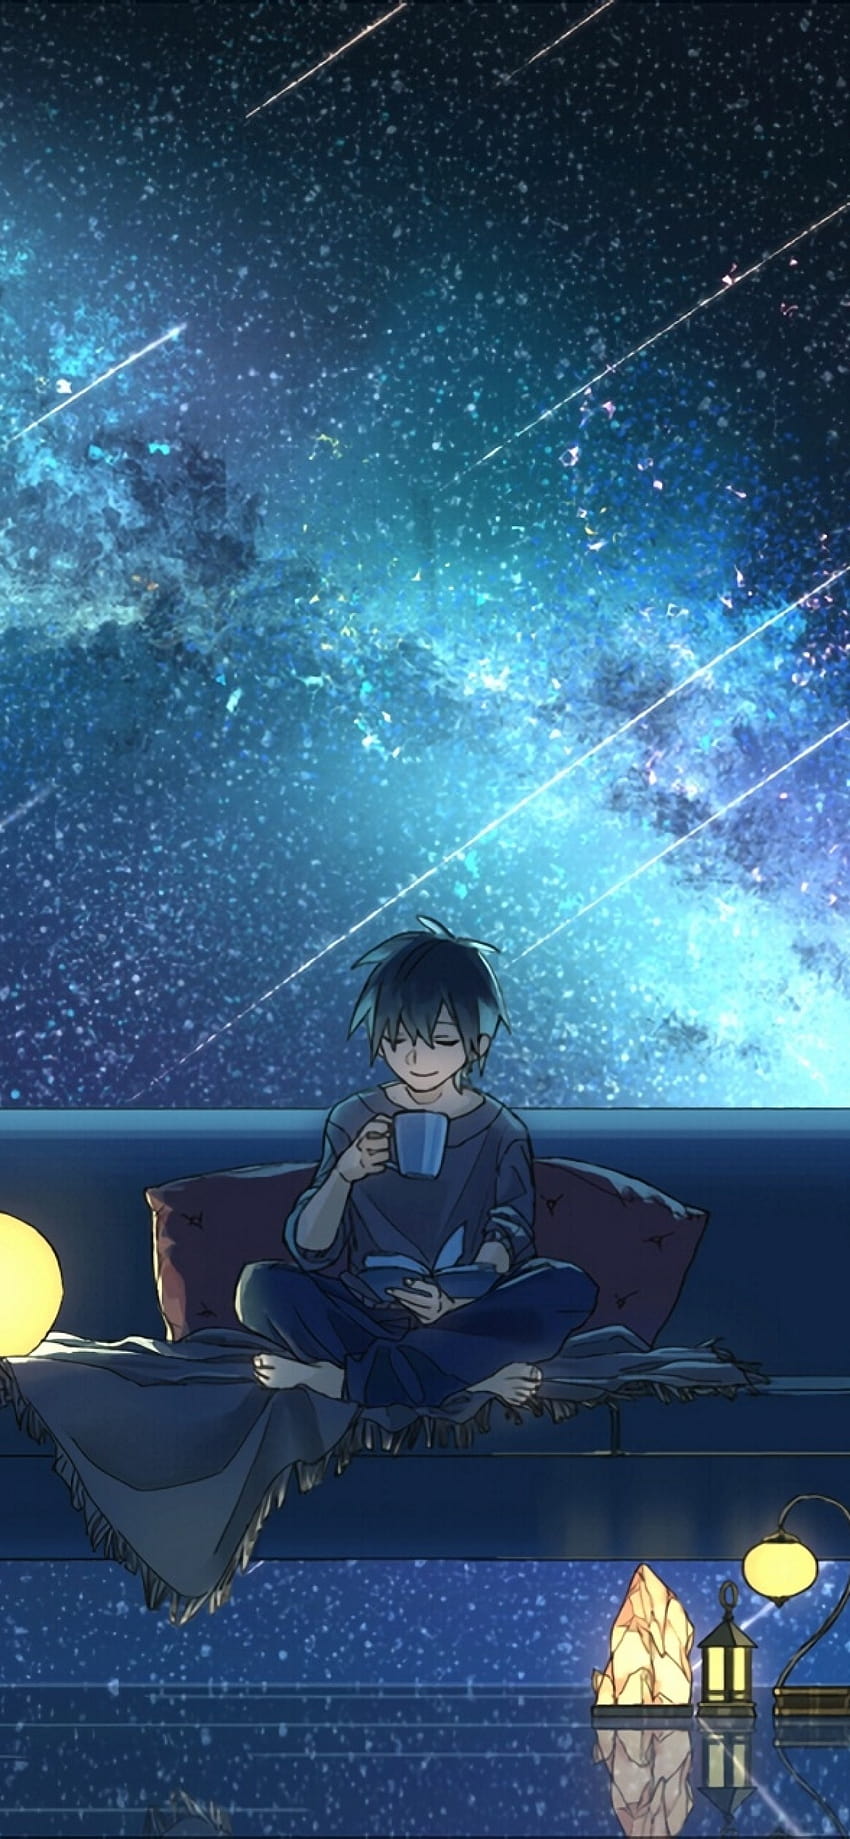 1284x2778 Anime Boy, Anime Landscape, Starry Sky, Night, Scenery, Barefoot, Drink, Faling Stars for iPhone 12 Pro Max, night anime aesthetic scenery HD phone wallpaper